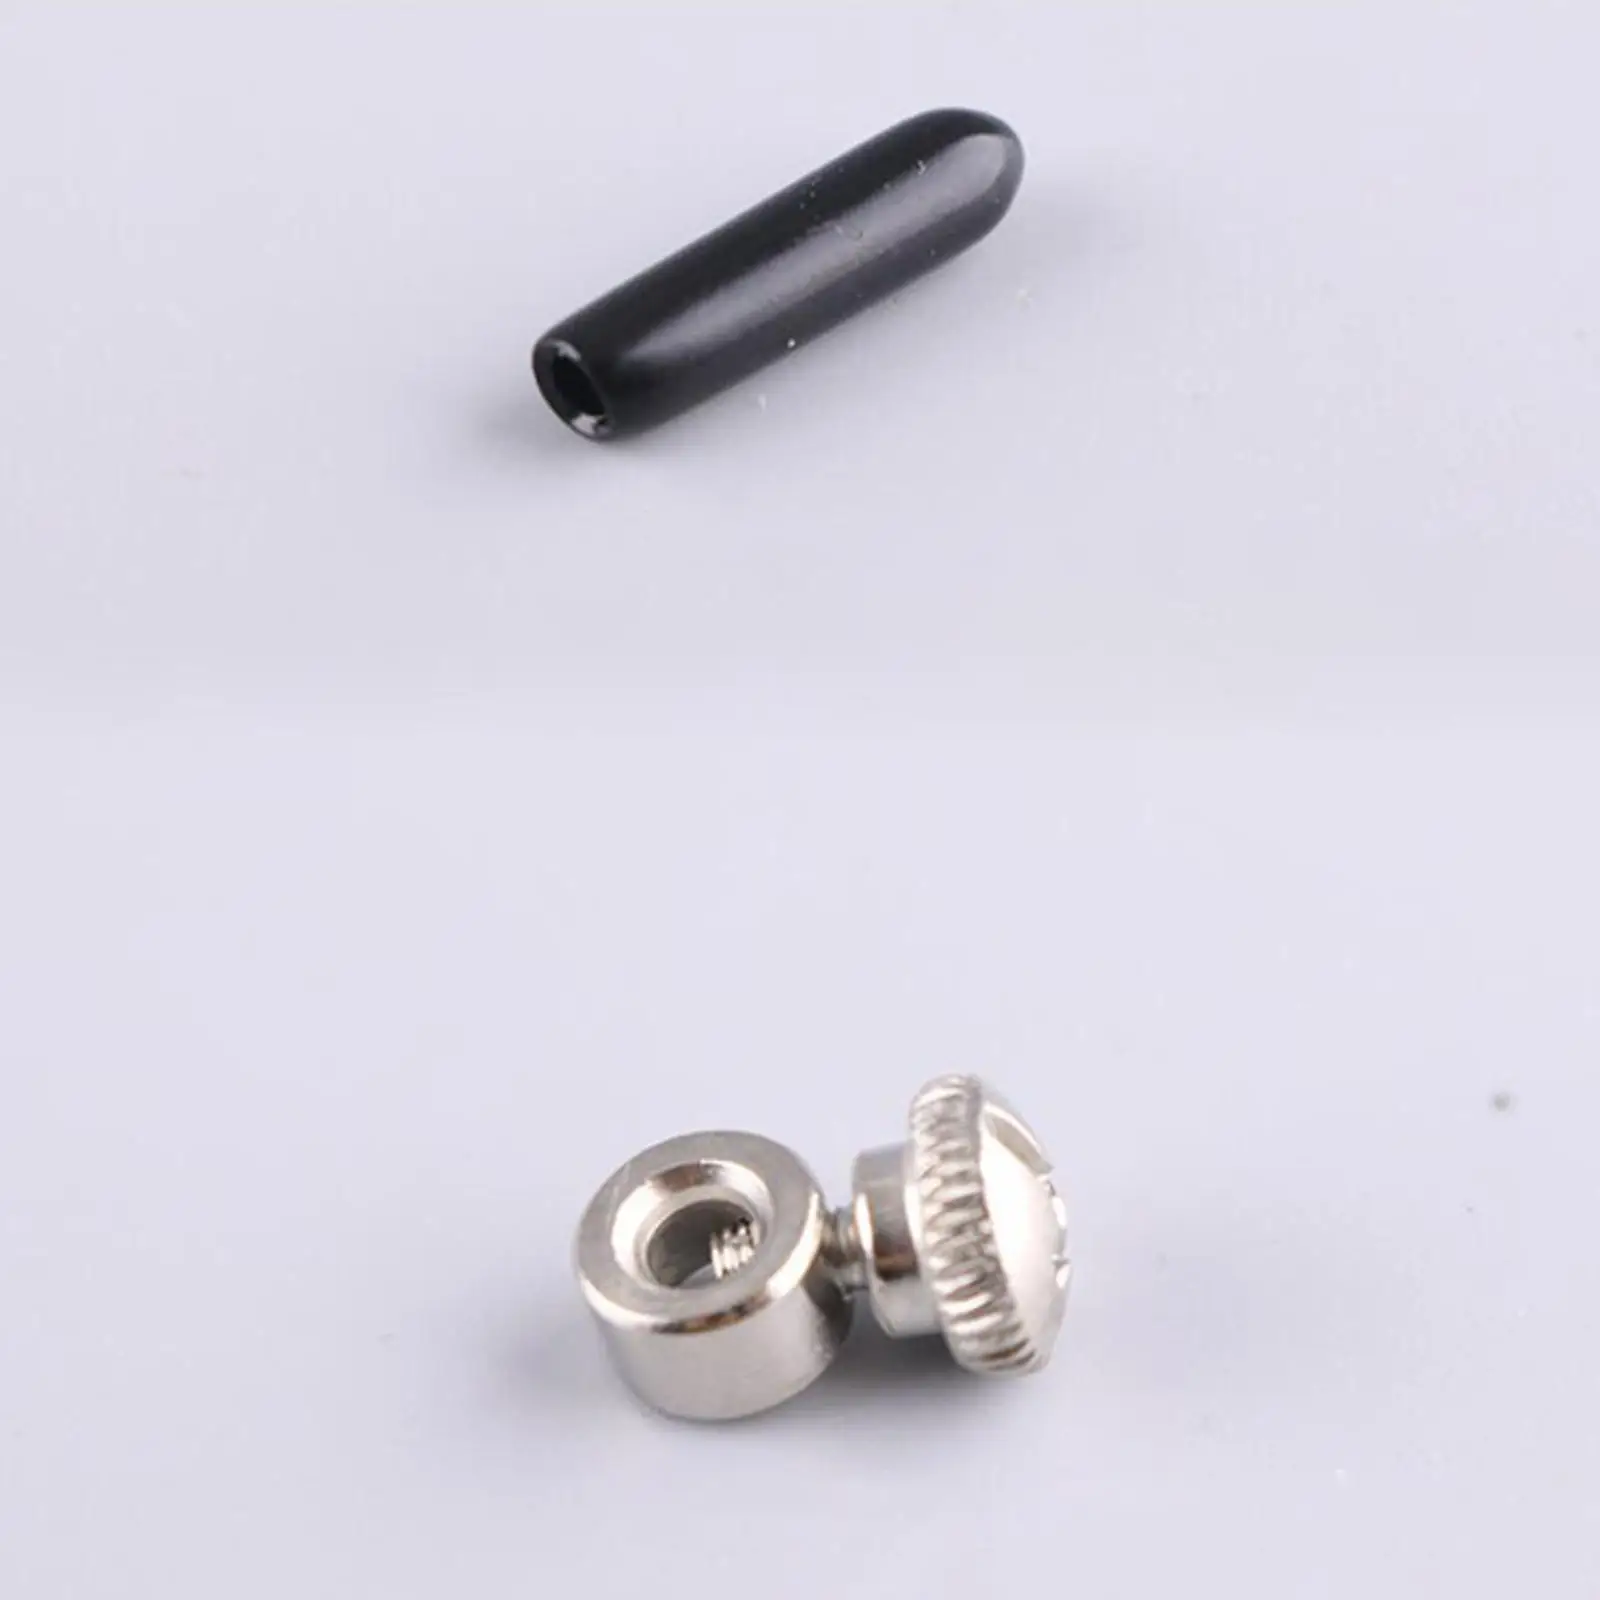 2 Pair Jump Rope Screws End Caps Set Cable Length Adjuster Parts Hardware Adjustable Screws End Covers for Single Skip Rope